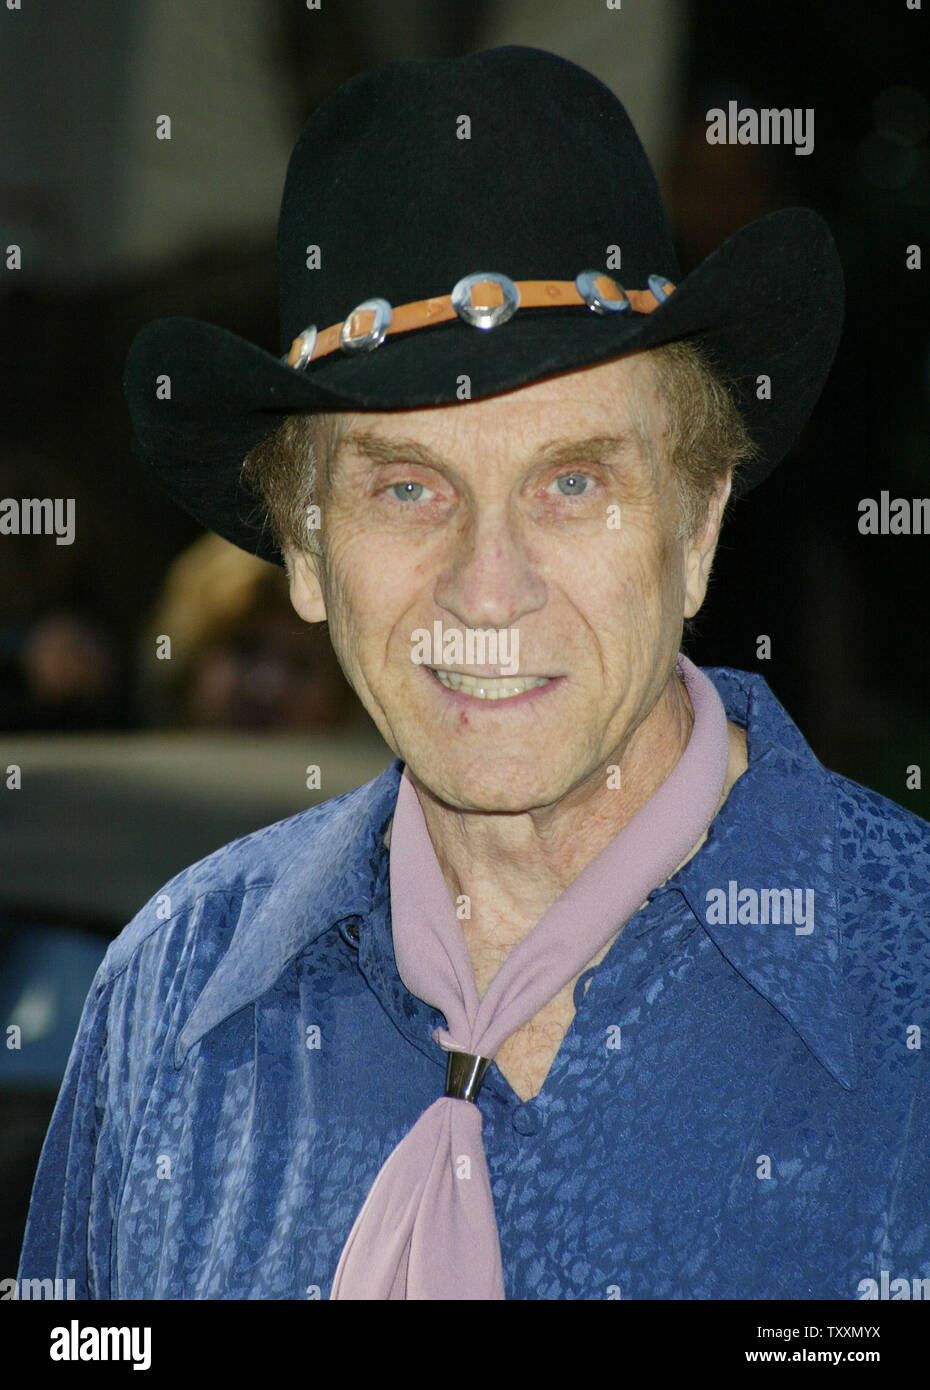 Actor Peter Mark Richman poses at the 22nd Annual Golden Boot Awards in Los Angeles on August 7, 2004. The Golden Boot Awards were established in 1982 to recognize performers, stunt people, producers and directors who have furthered the tradition of the Western on film and television. (UPI Photo/Francis Specker) Stock Photo